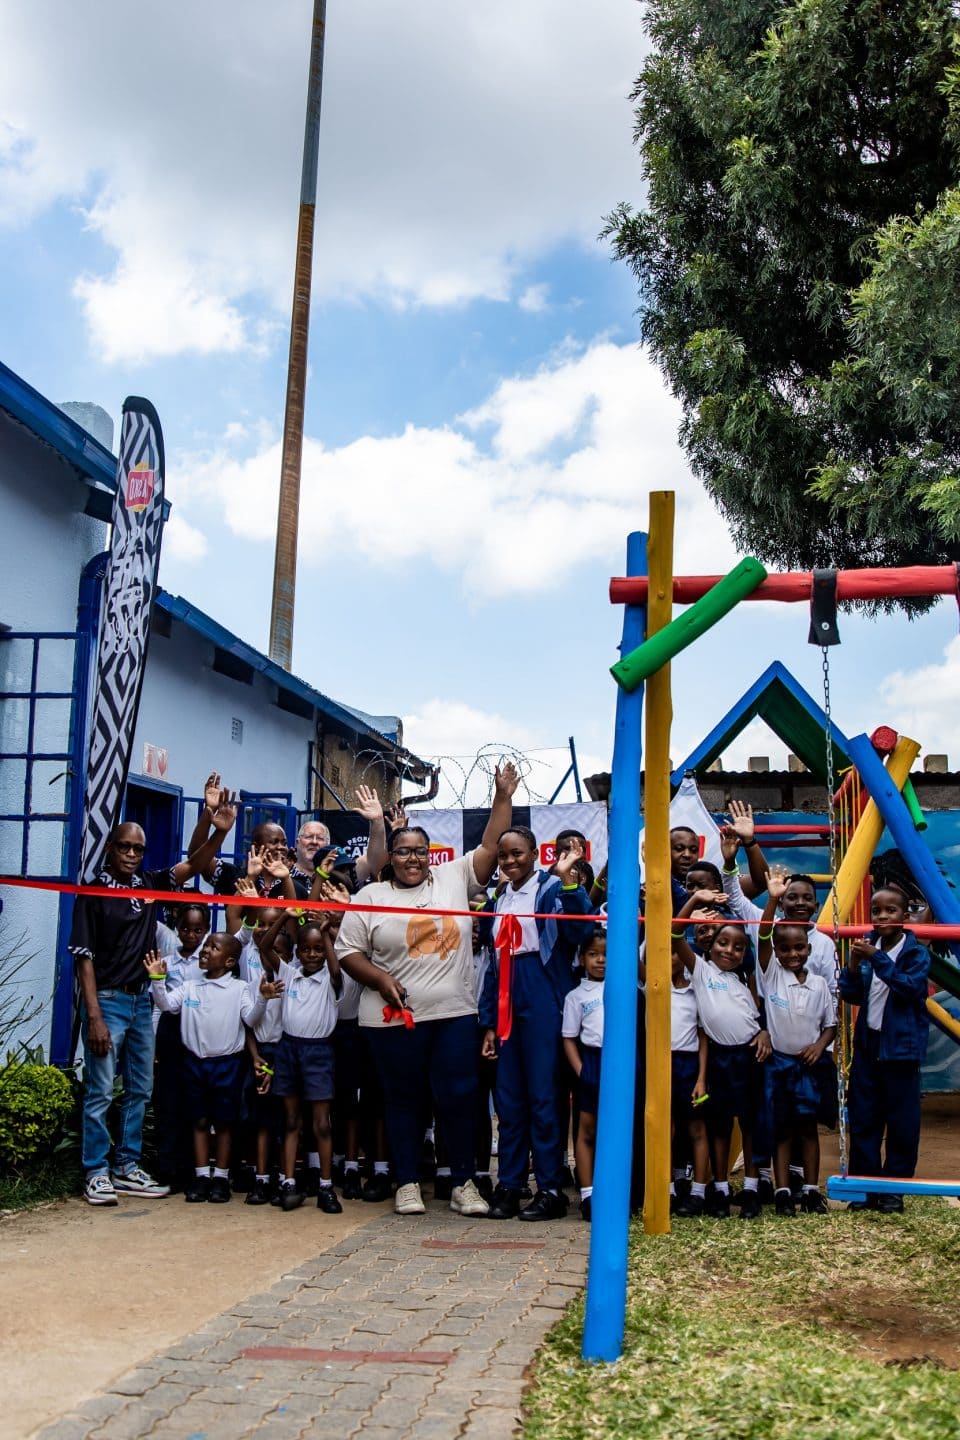 KGOLOLO ACADEMY IN ALEXANDRA RECEIVES A JUNGLE GYM THROUGH THE BETTER-QUALITY PLAY CAMPAIGN